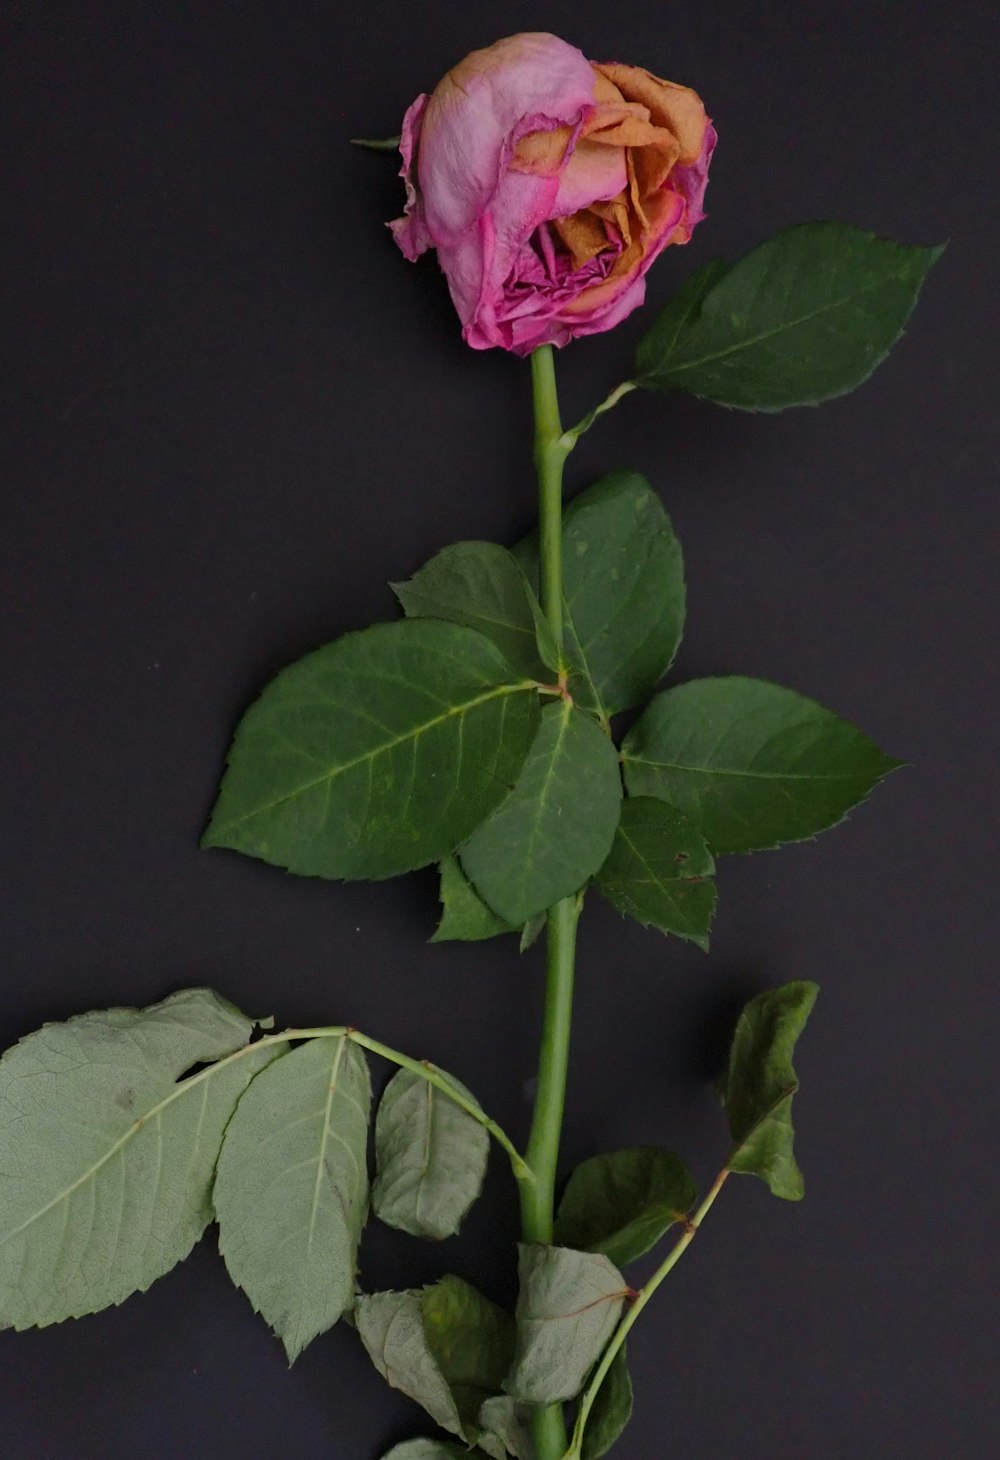 a single pink rose with green leaves on a black background